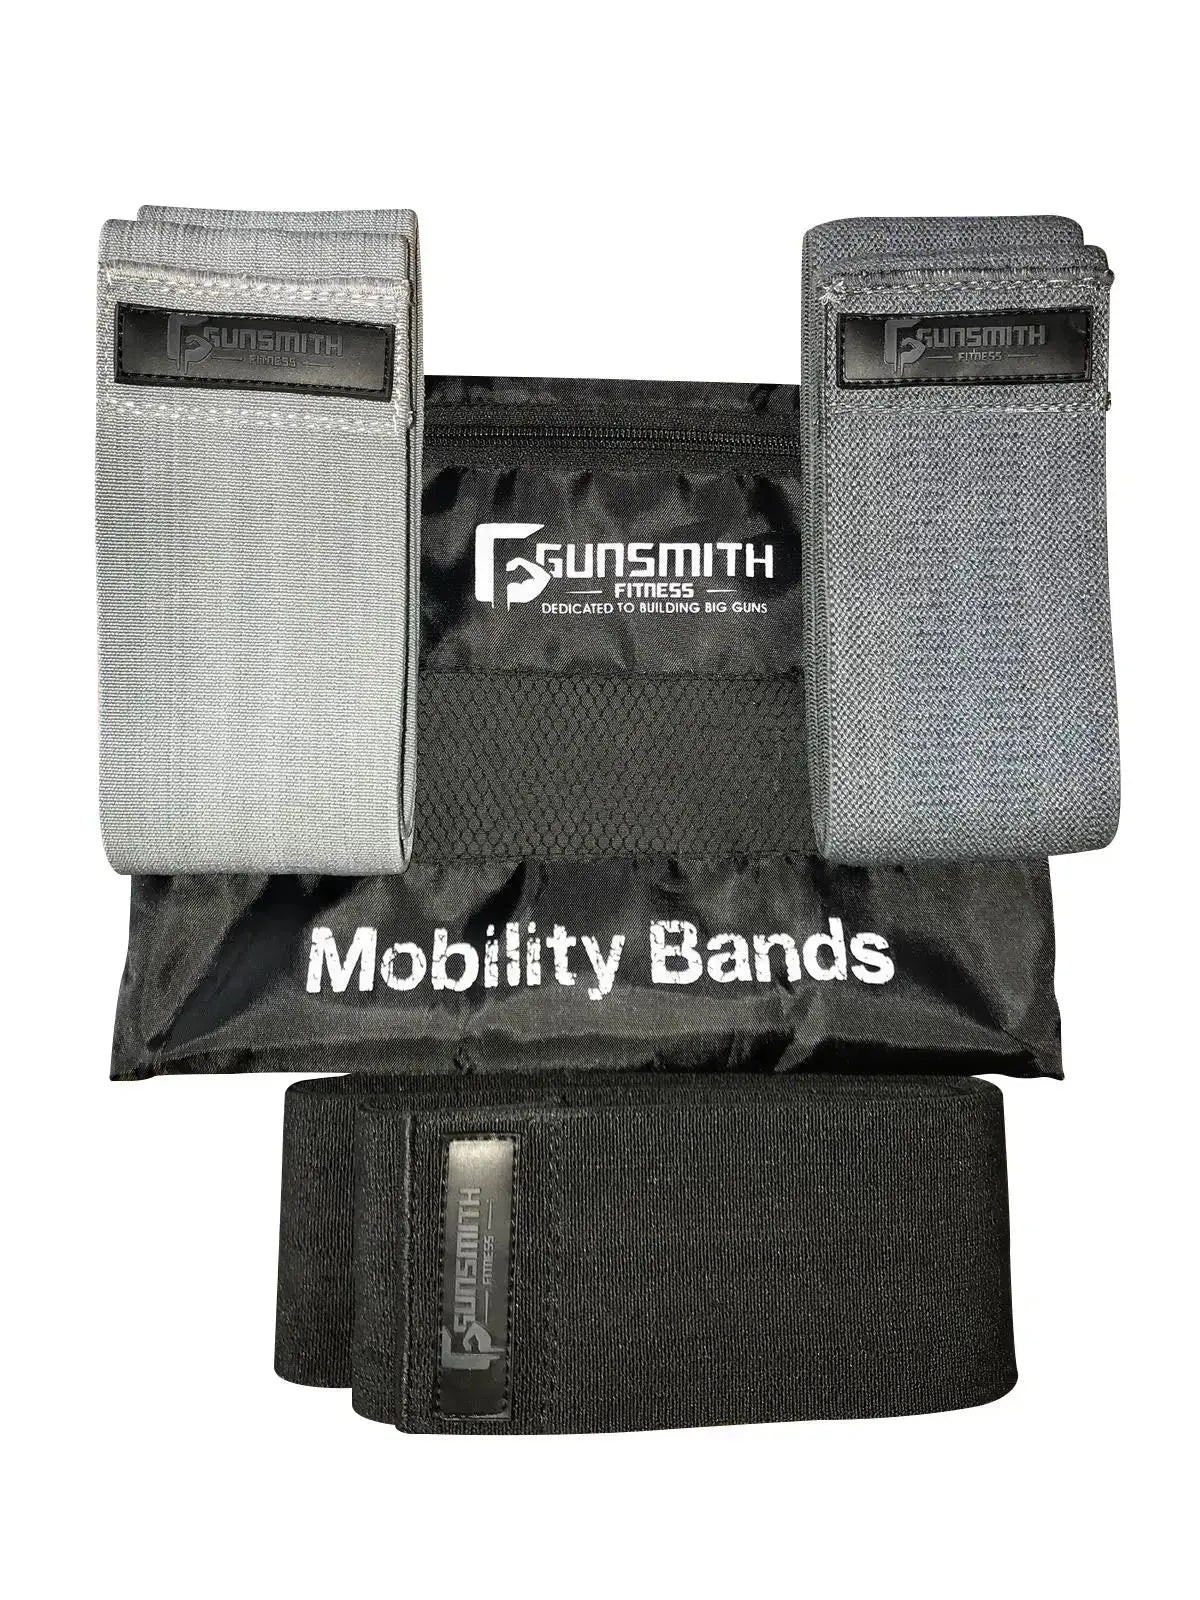 Mobility/Glute Band Triple Pack - Gunsmith Fitness